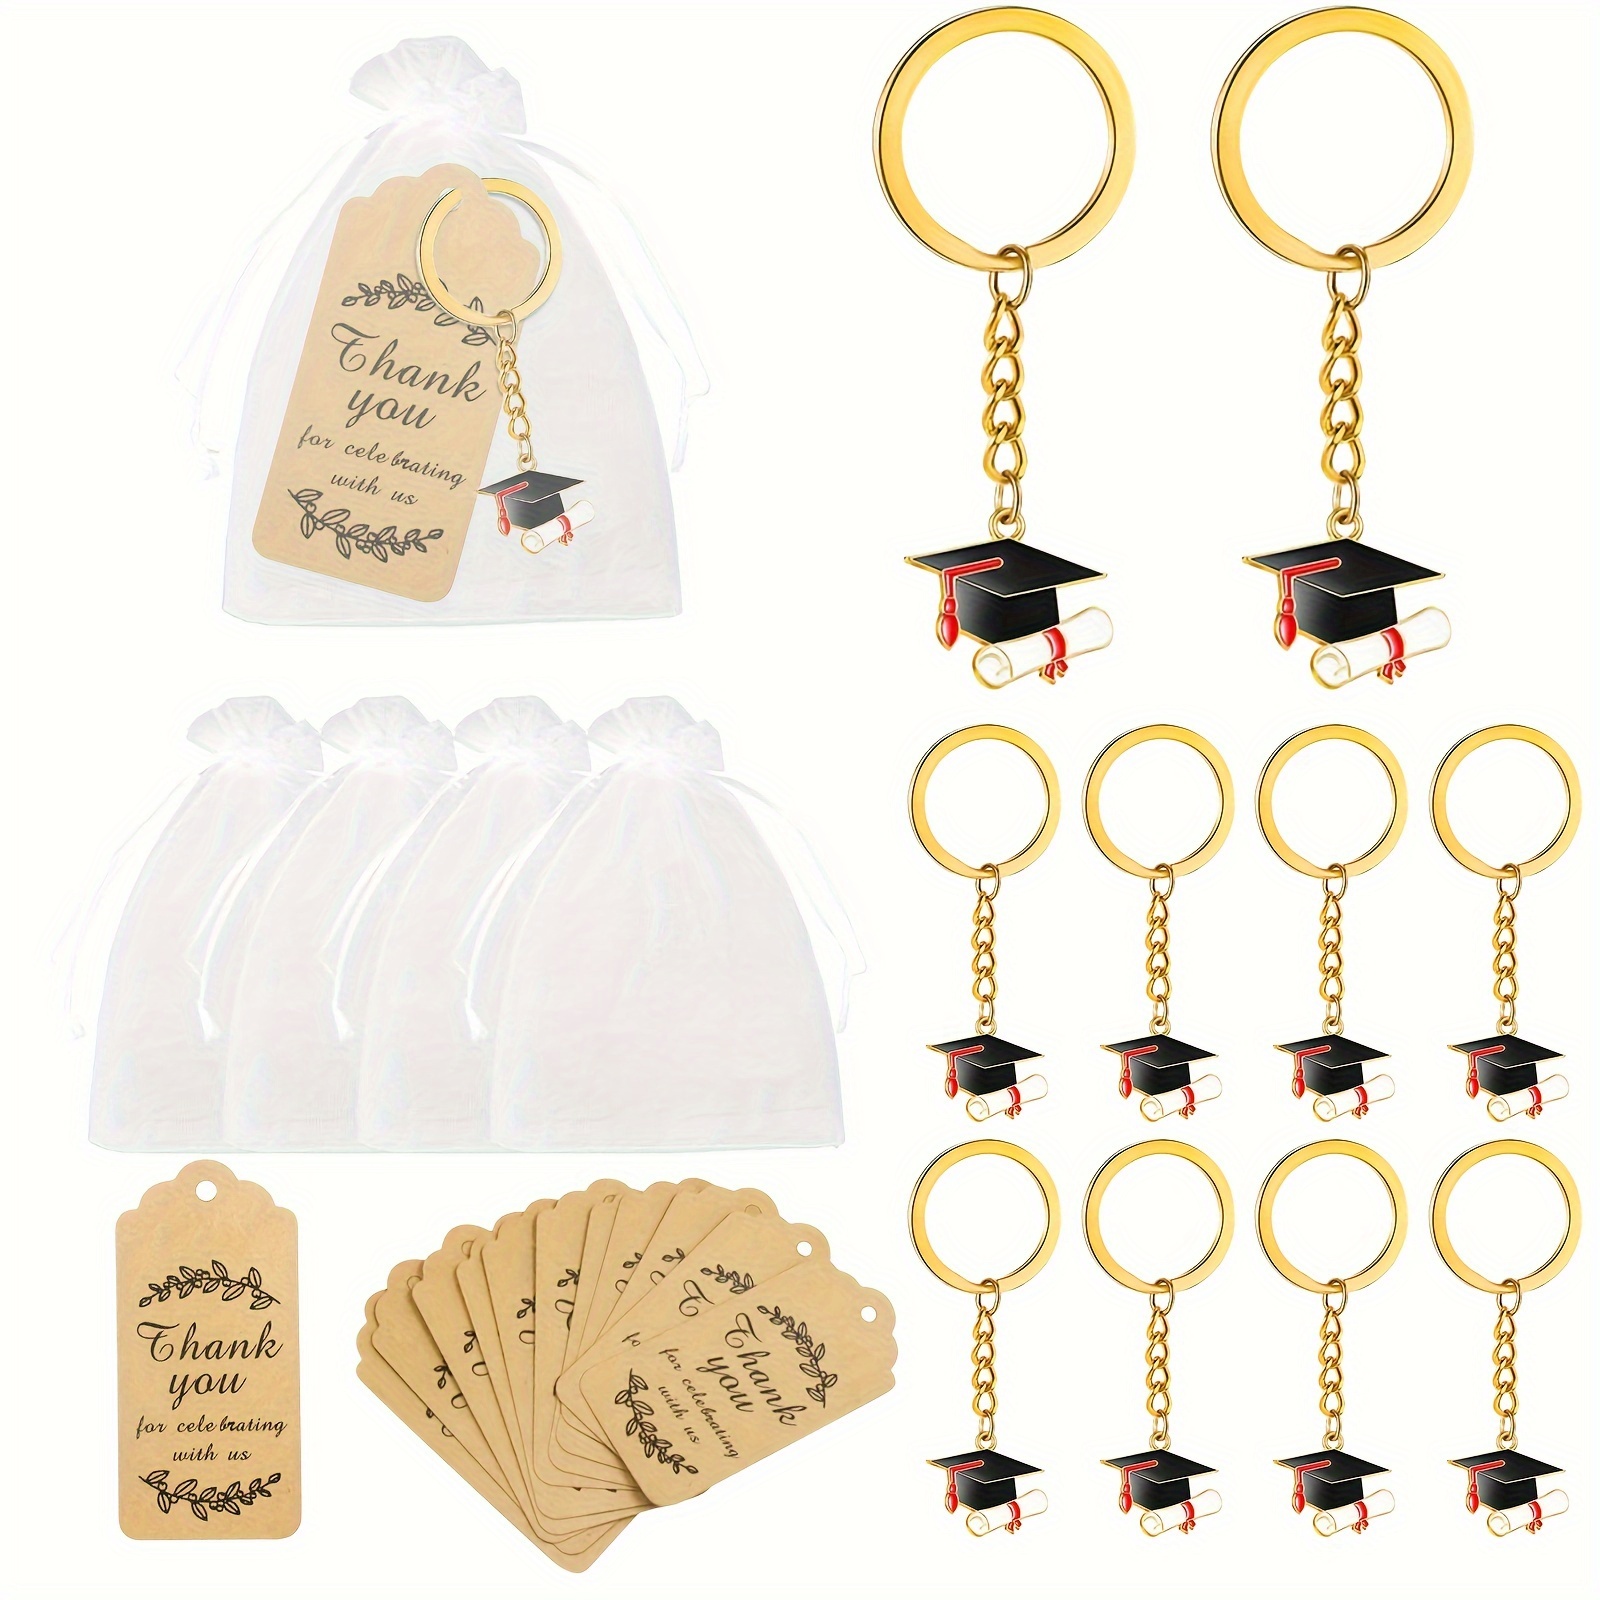 

Graduation Shark Fantasy Themed Keychain Set With Organza Gift Bags And Thank You Cards, 30 Piece Pack - Plastic Black Keychains For Party Favors And Grad Gifts